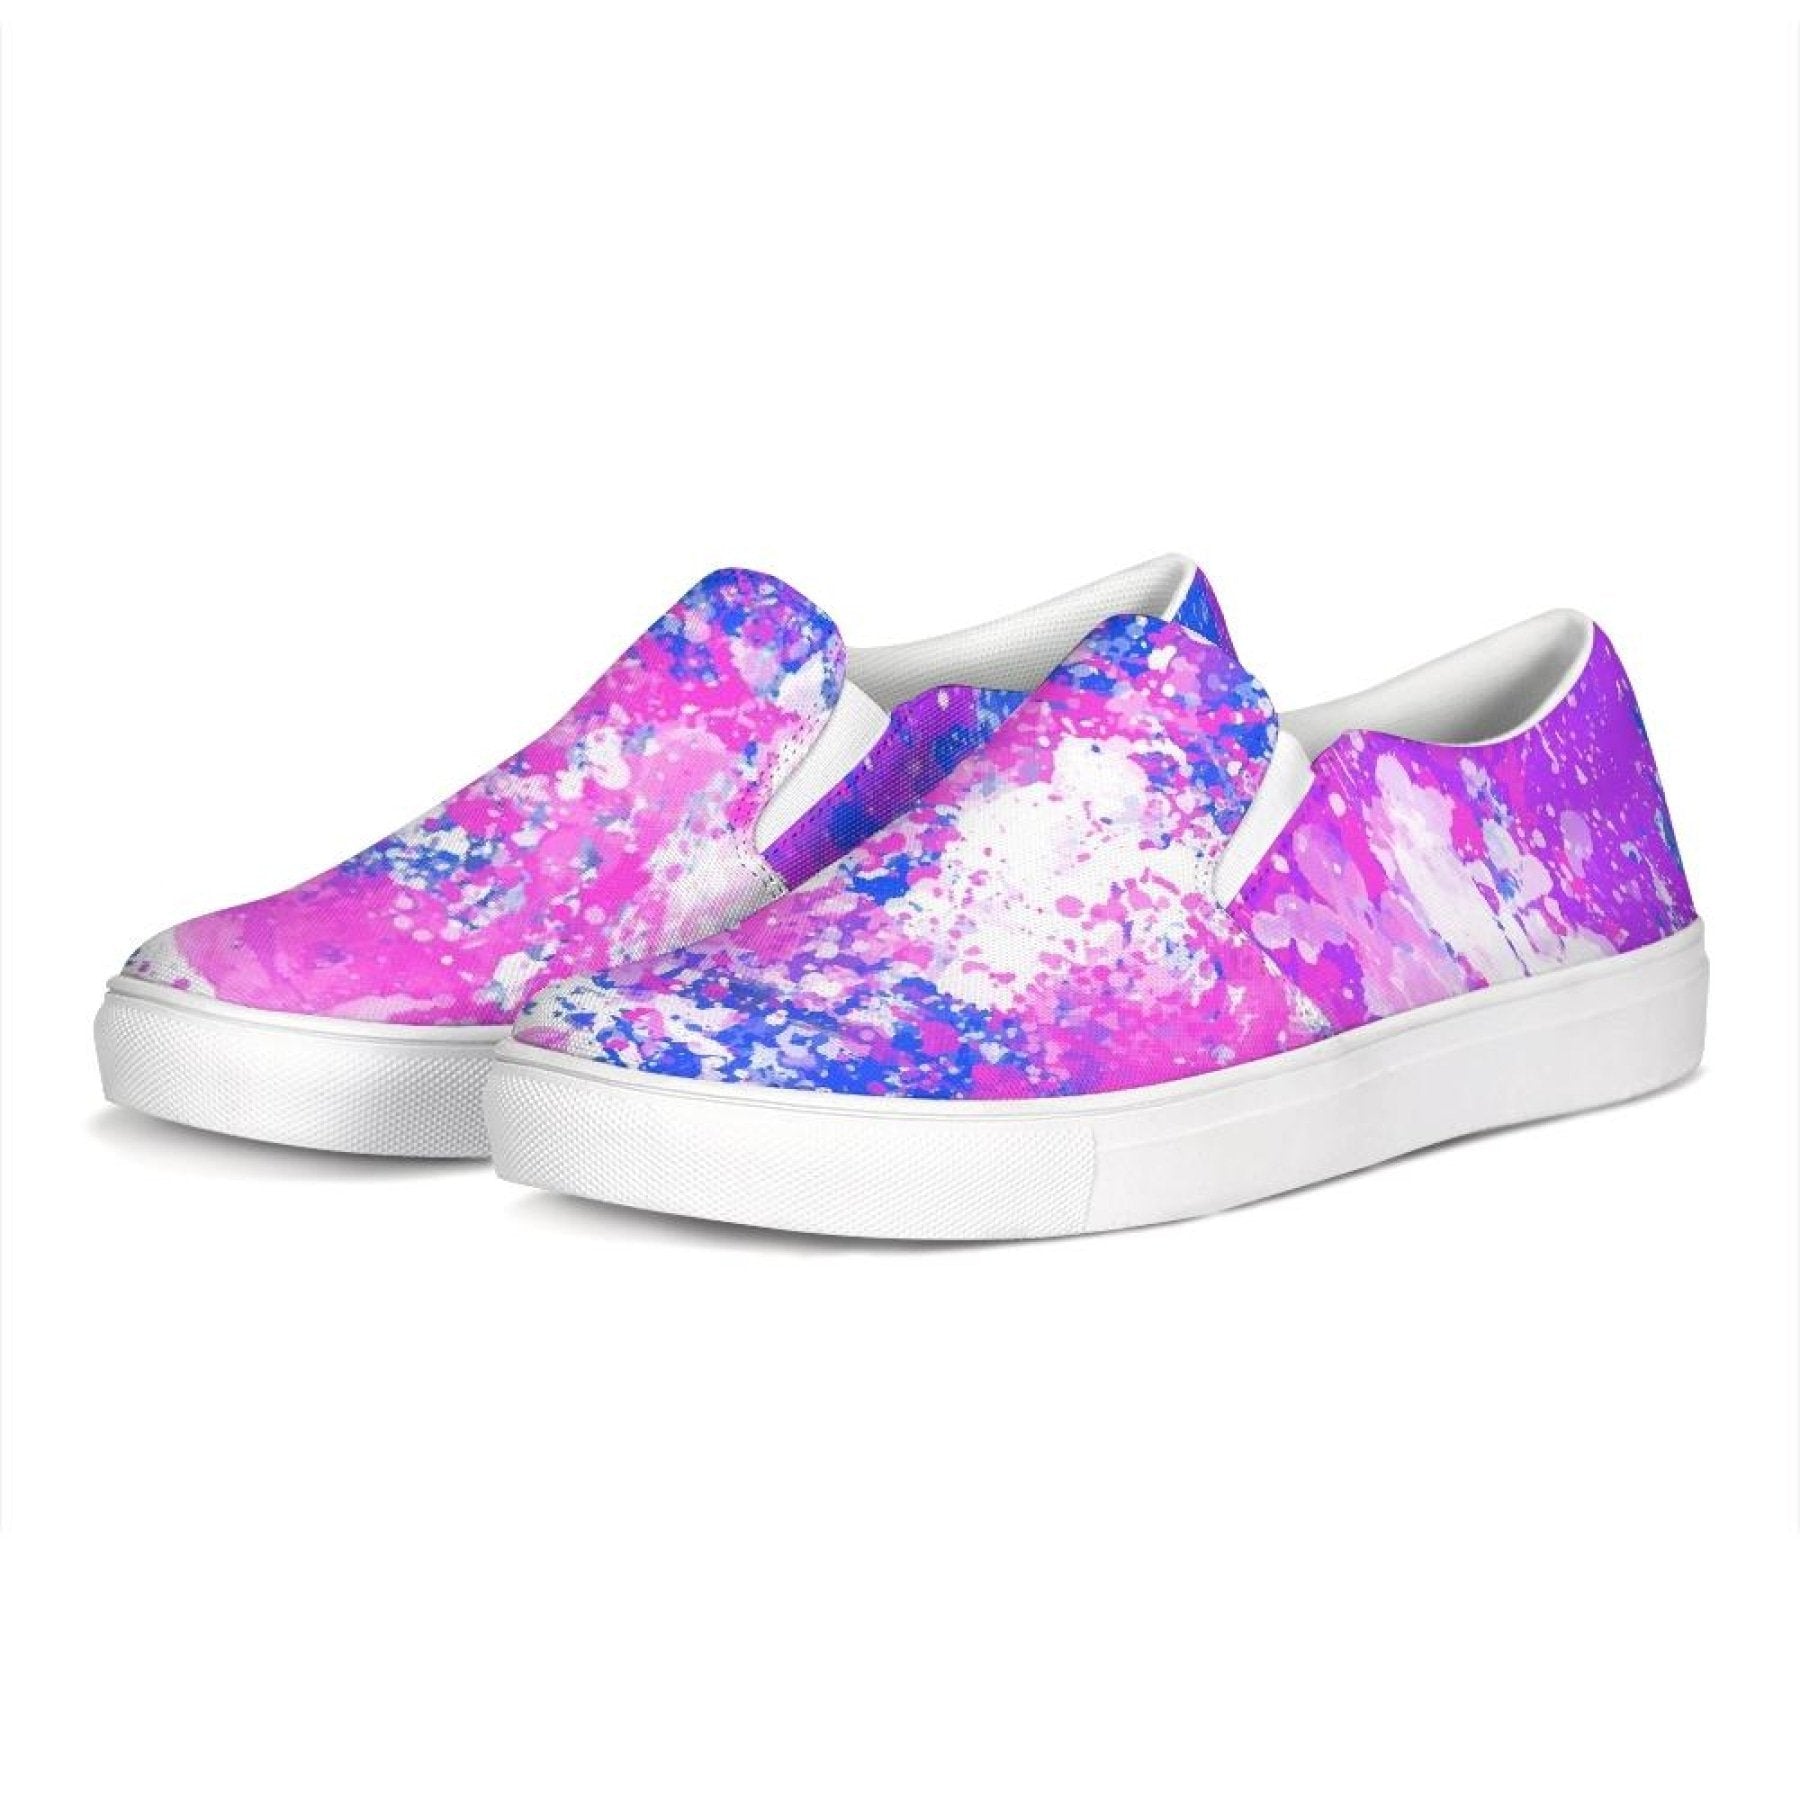 Uniquely You Womens Sneakers - Purple Tie-Dye Style Canvas Sports